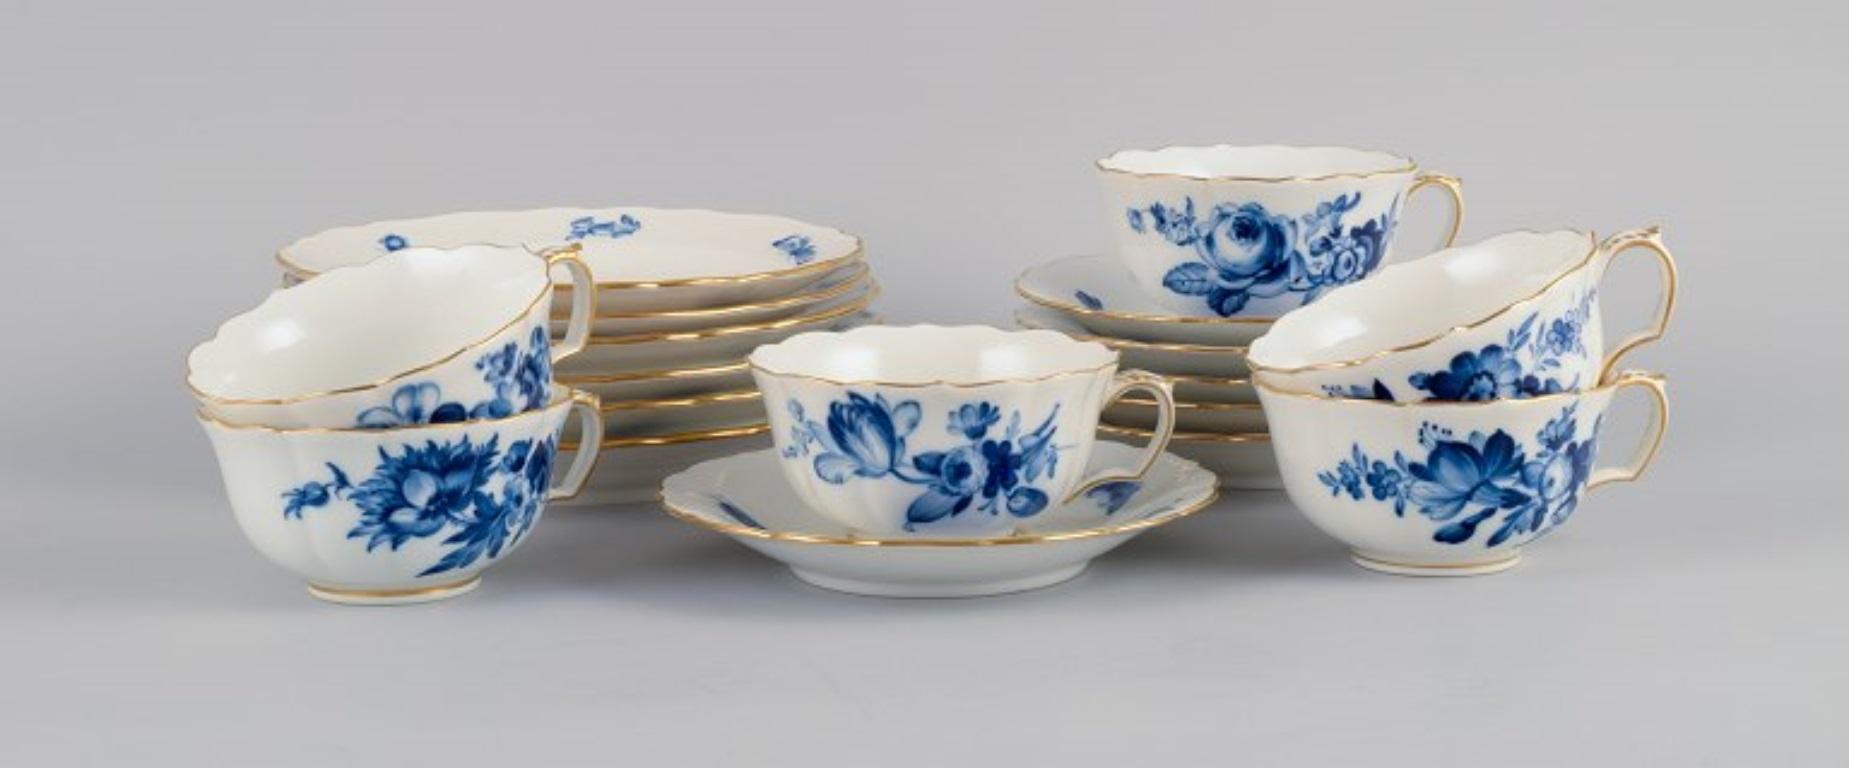 Meissen, Germany, tea set for six.
Hand-painted in blue with flowers and insects. Gold decoration on edges.
19th century.
In perfect condition, without signs of use.
First factory quality.
Marked.
Cup: D 9.8 without handle x H 5.0 cm.
Cake